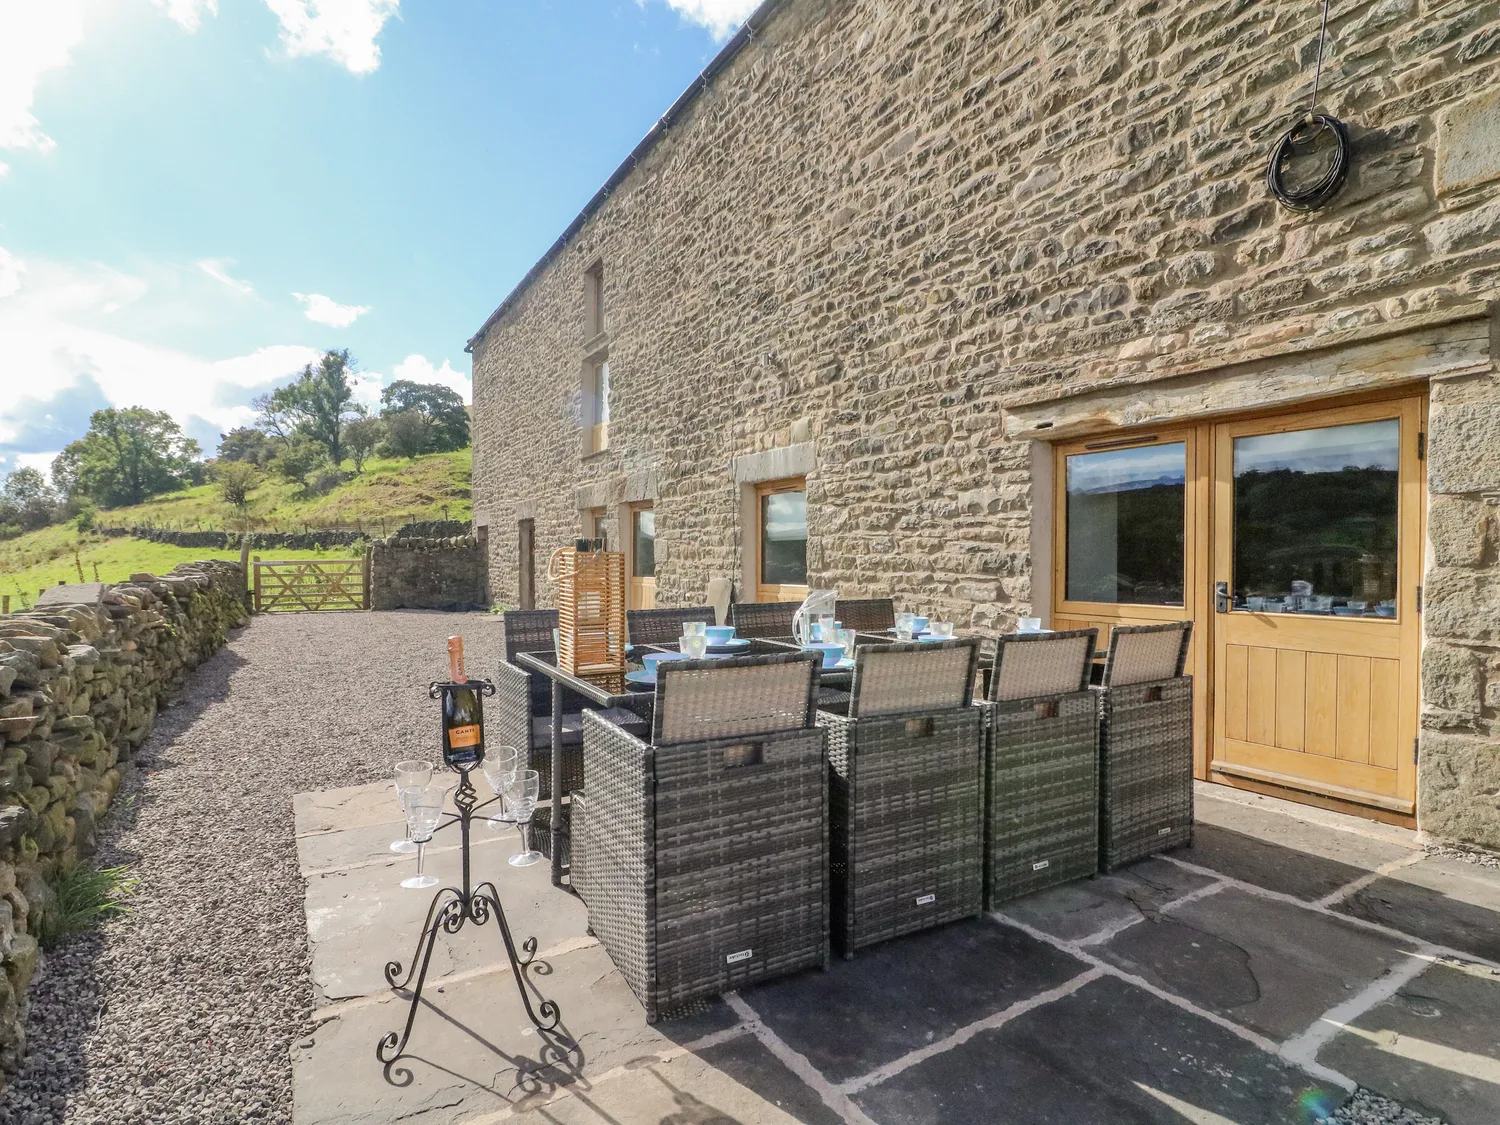 Image name hollow gill barn holiday cottage sedbergh cumbria the 3 image from the post Accommodation in Yorkshire.com.